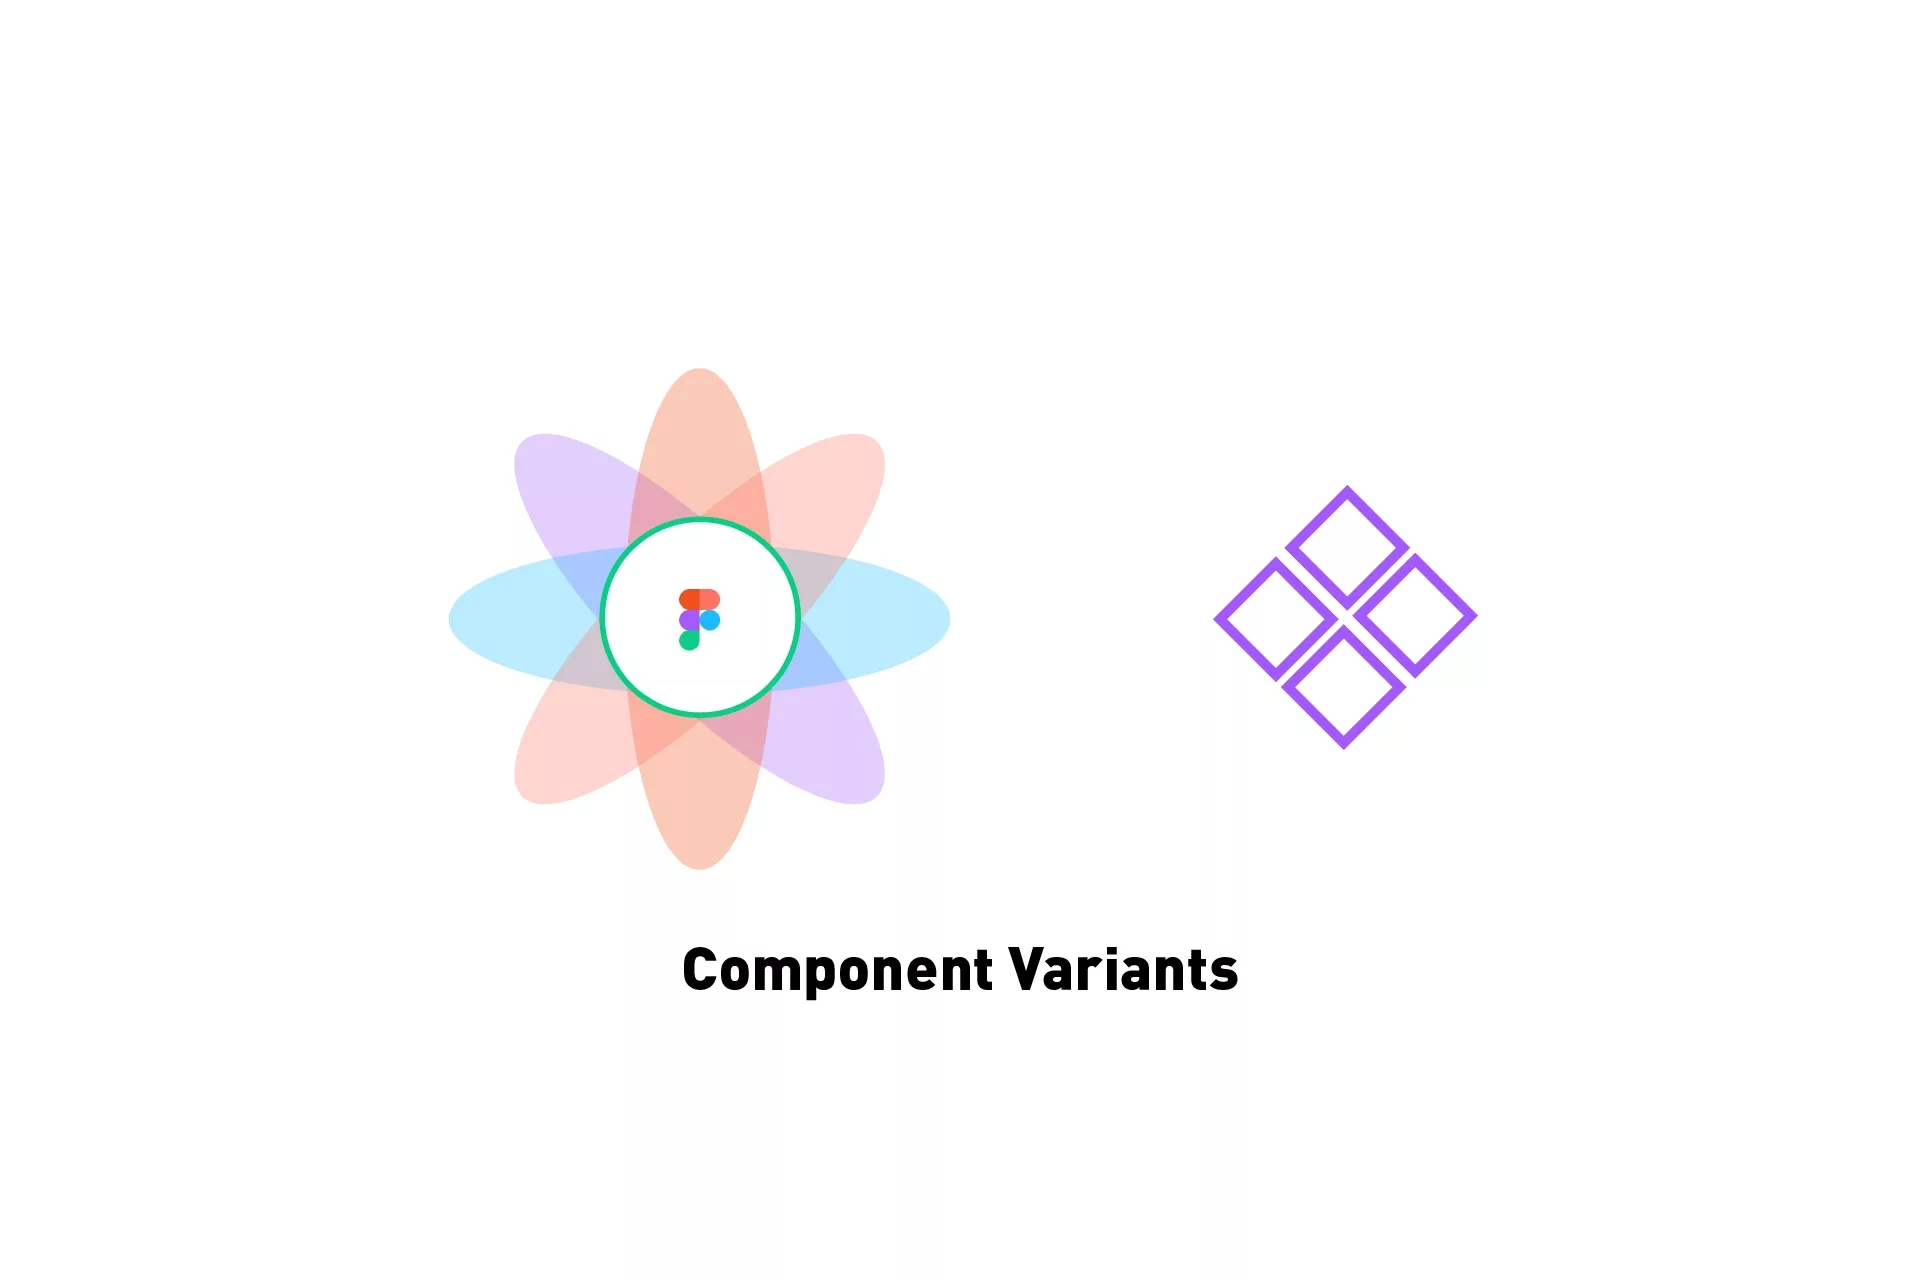 A Flower that represents Figma next to a with a diamond composed of squares, which is the symbol Figma gives to Components. Below it sits the text 'Component Variants'.